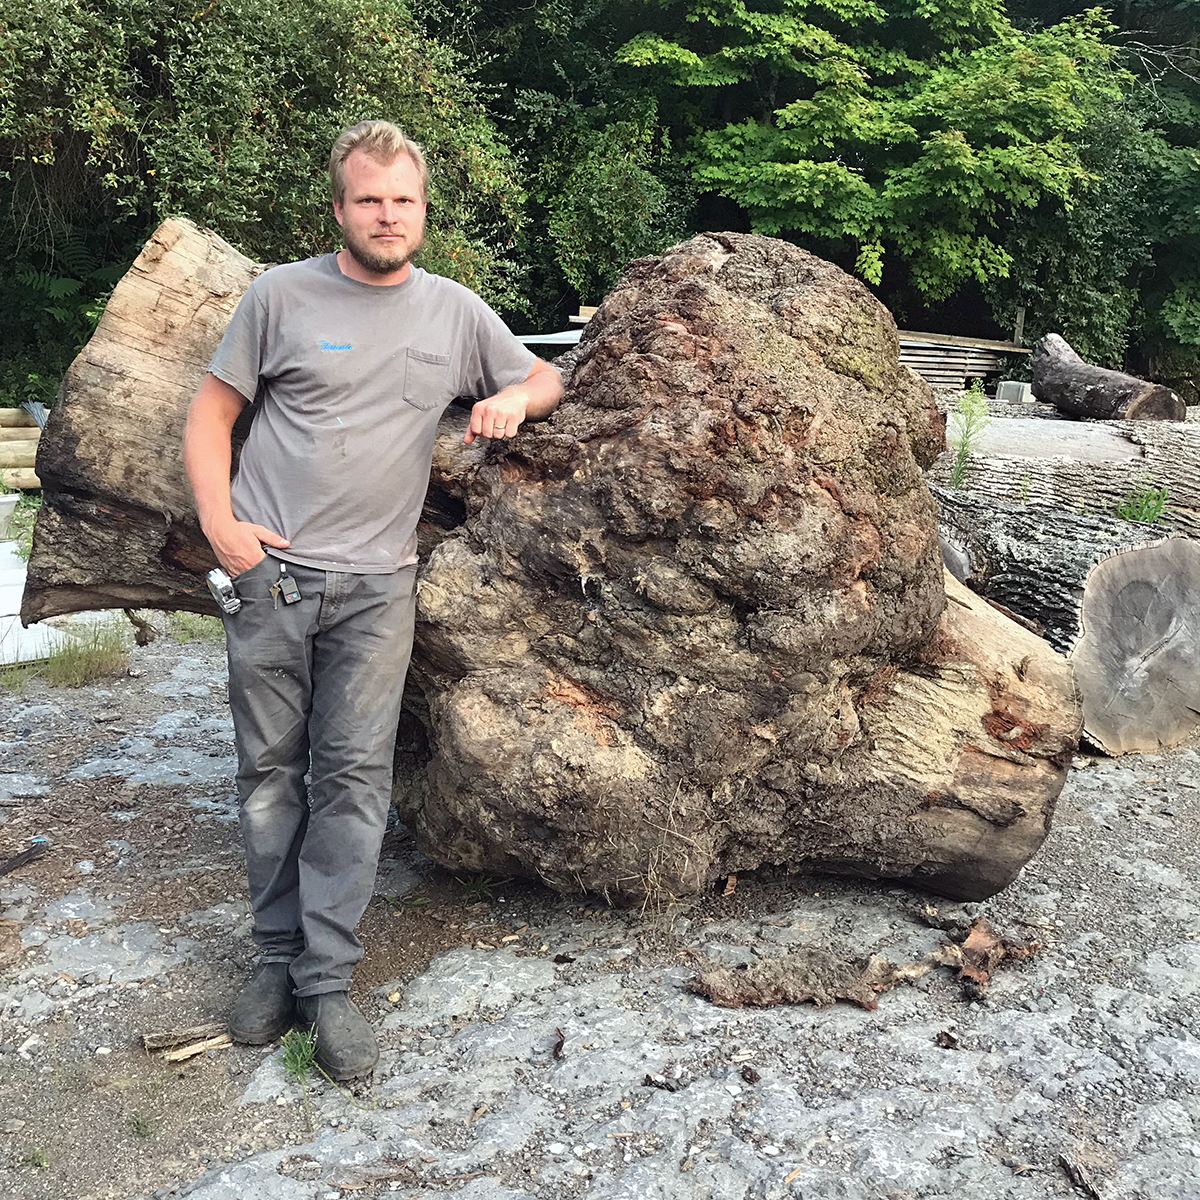 Timm leaning on a giant red oak burl to mill into table tops